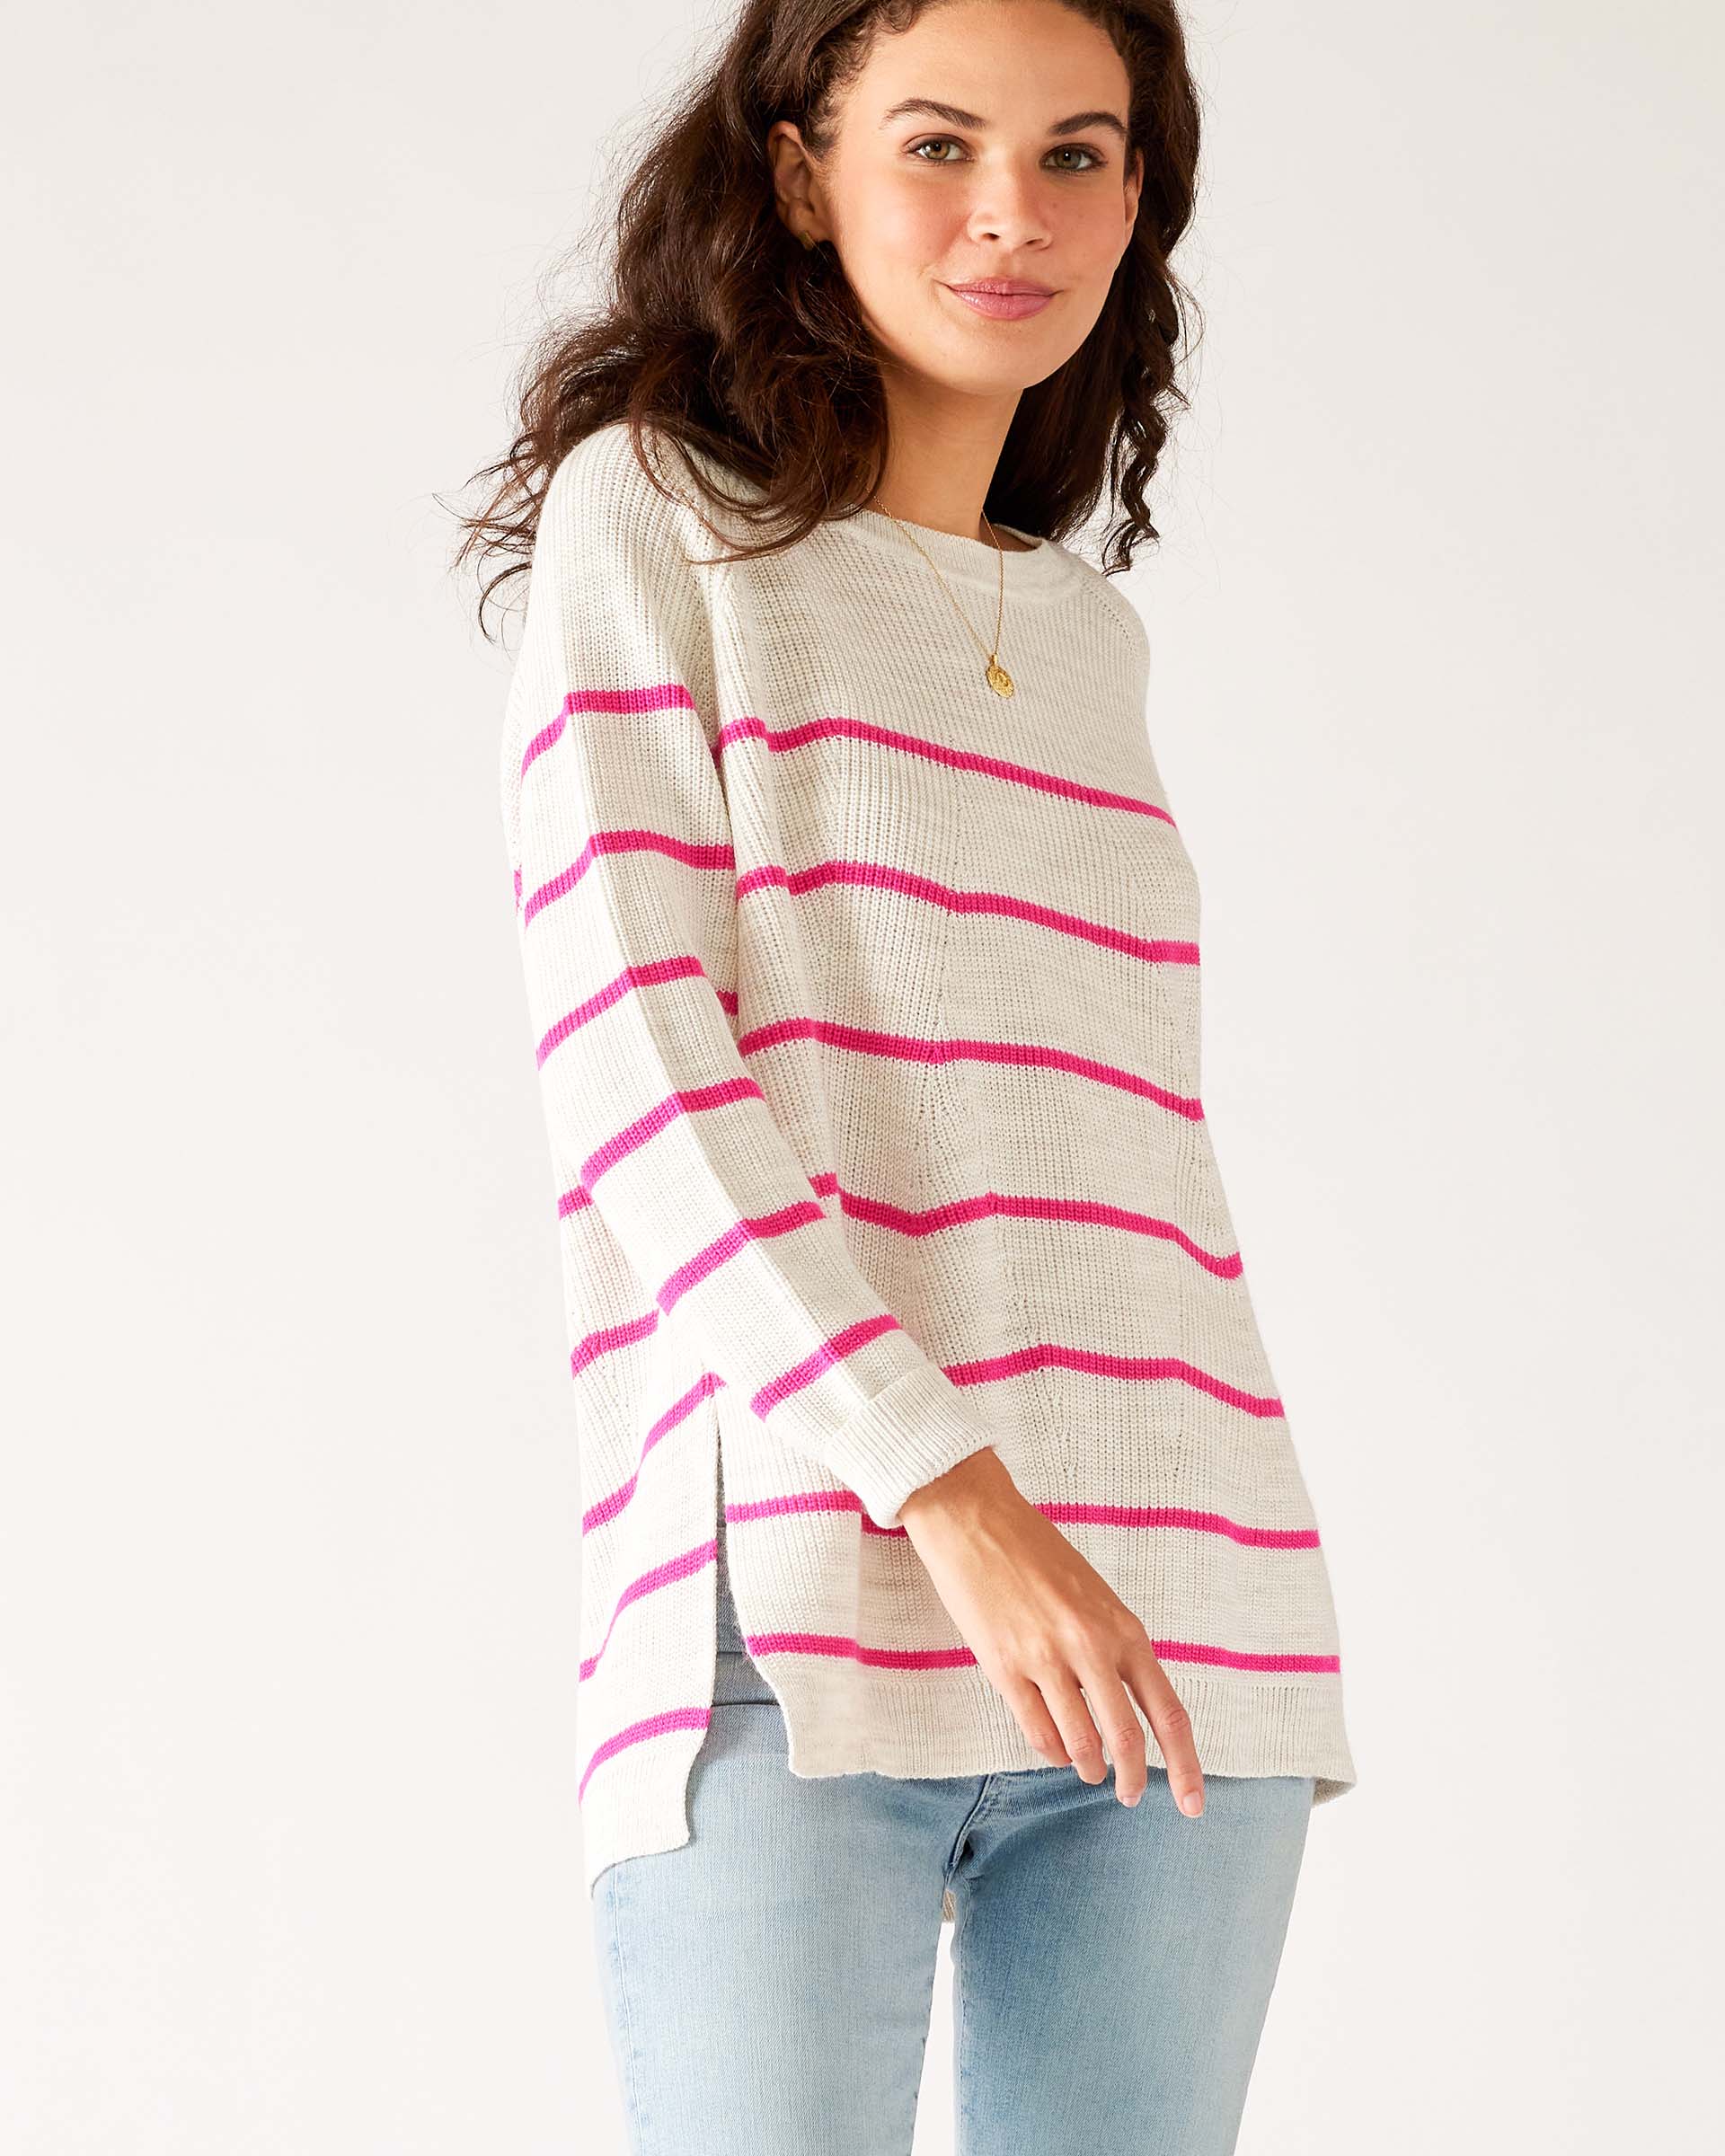 Womens White and Pink Striped Midweight Sweater Front View